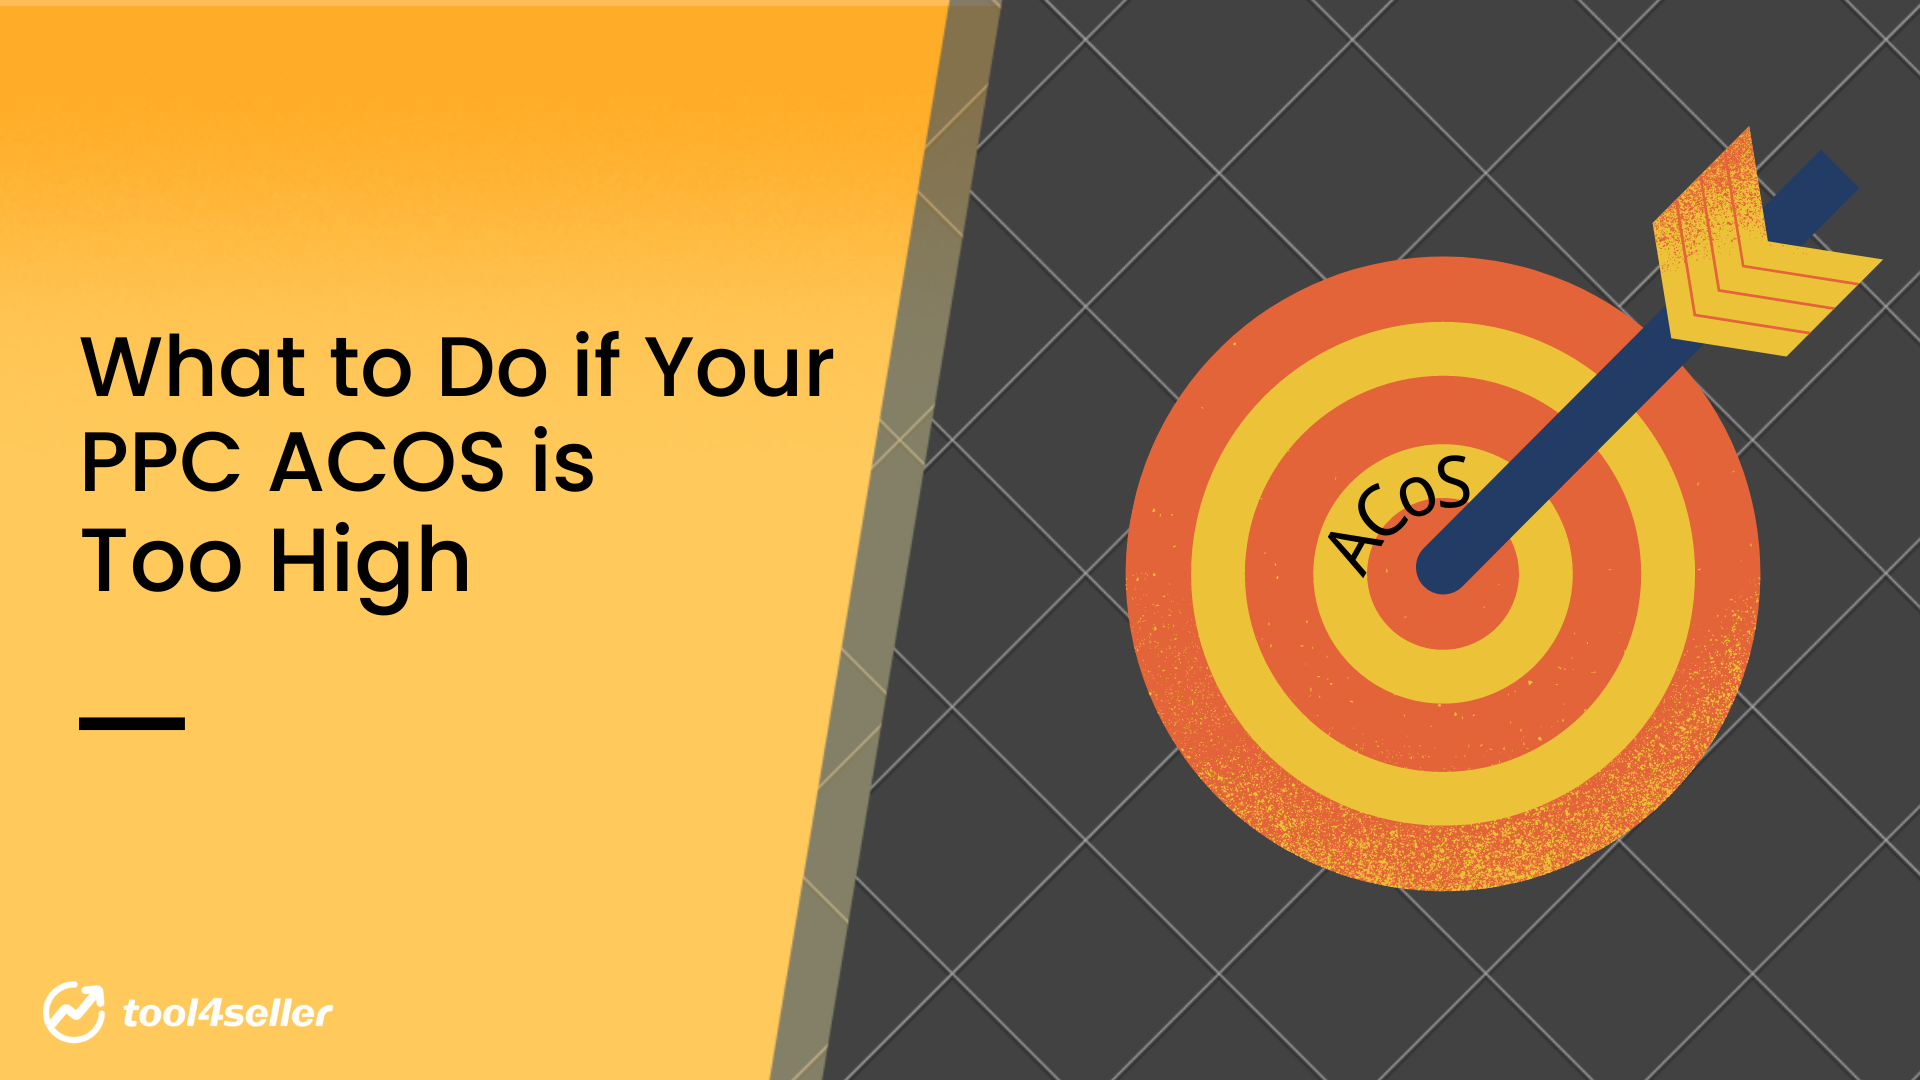 What to Do if Your PPC ACoS is Too High